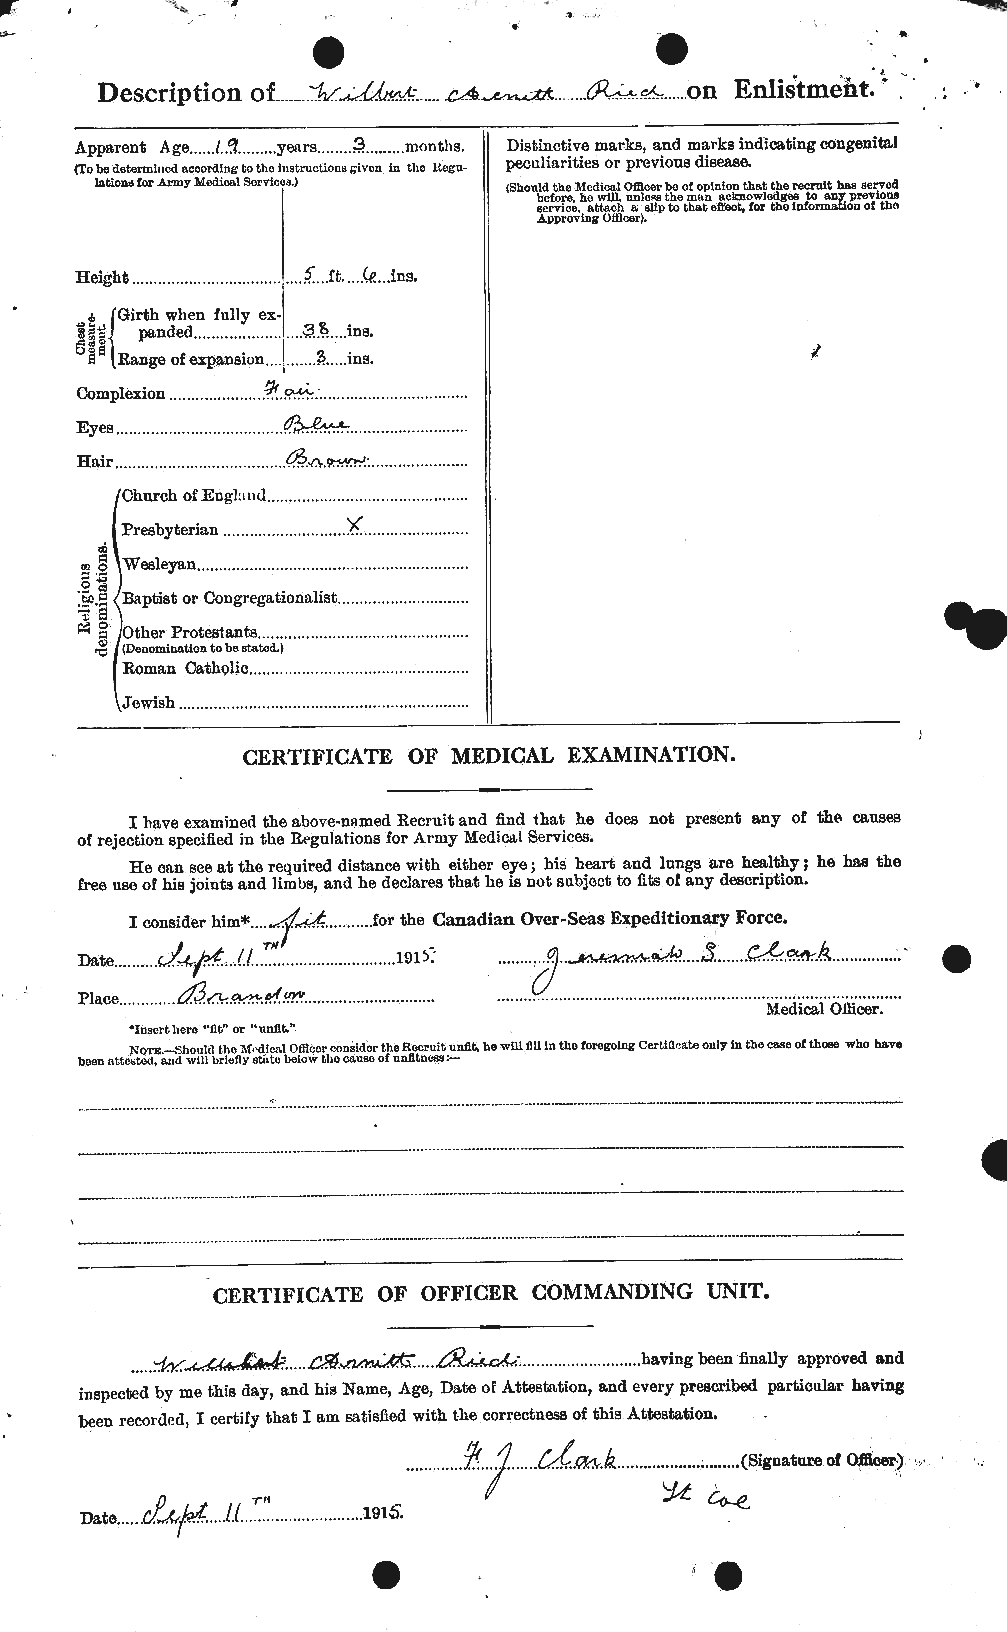 Personnel Records of the First World War - CEF 596899b